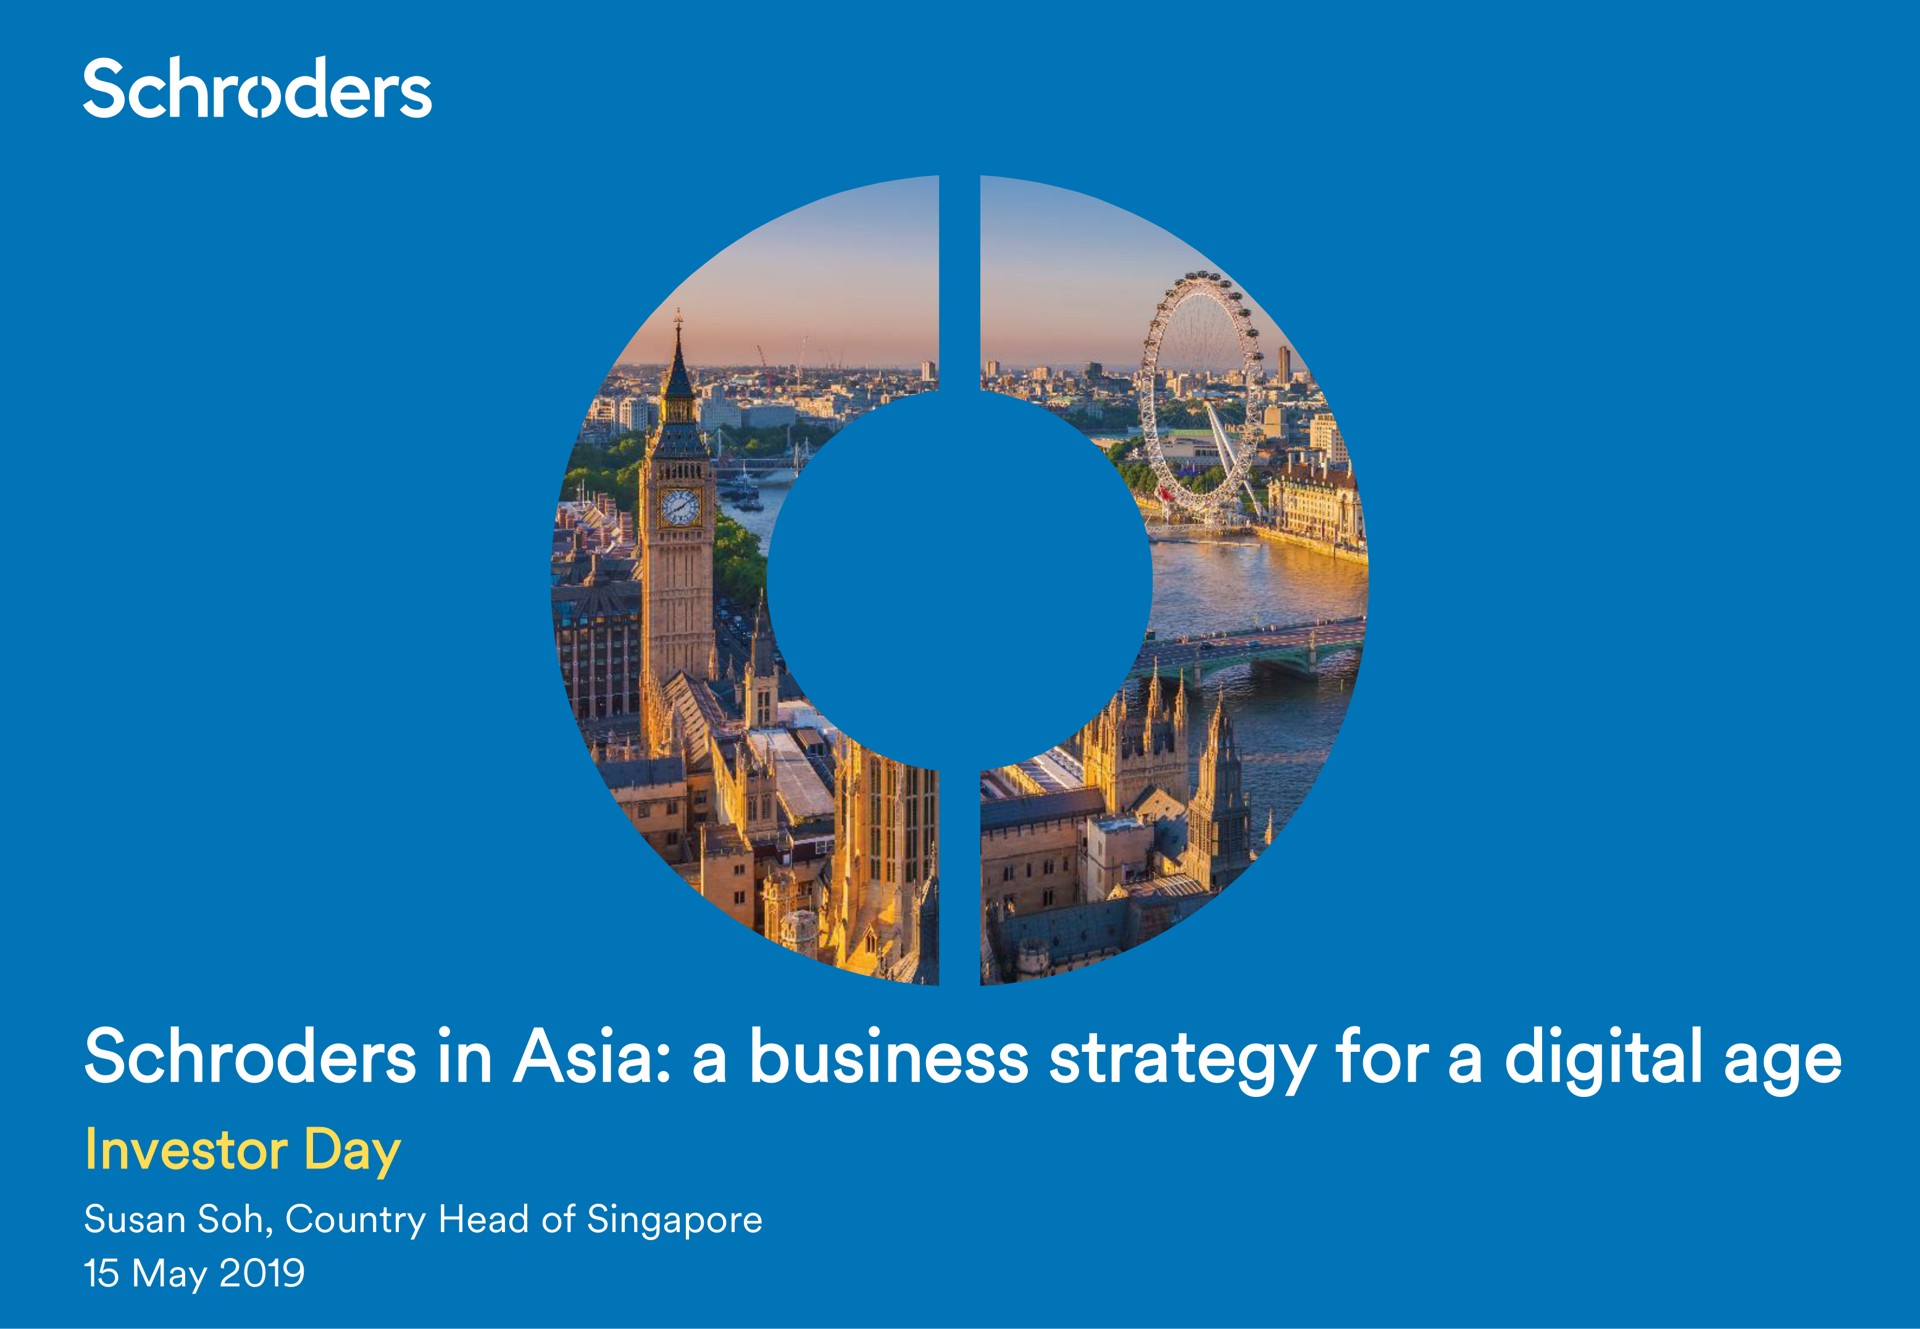 in a business strategy for a digital age investor day | Schroders